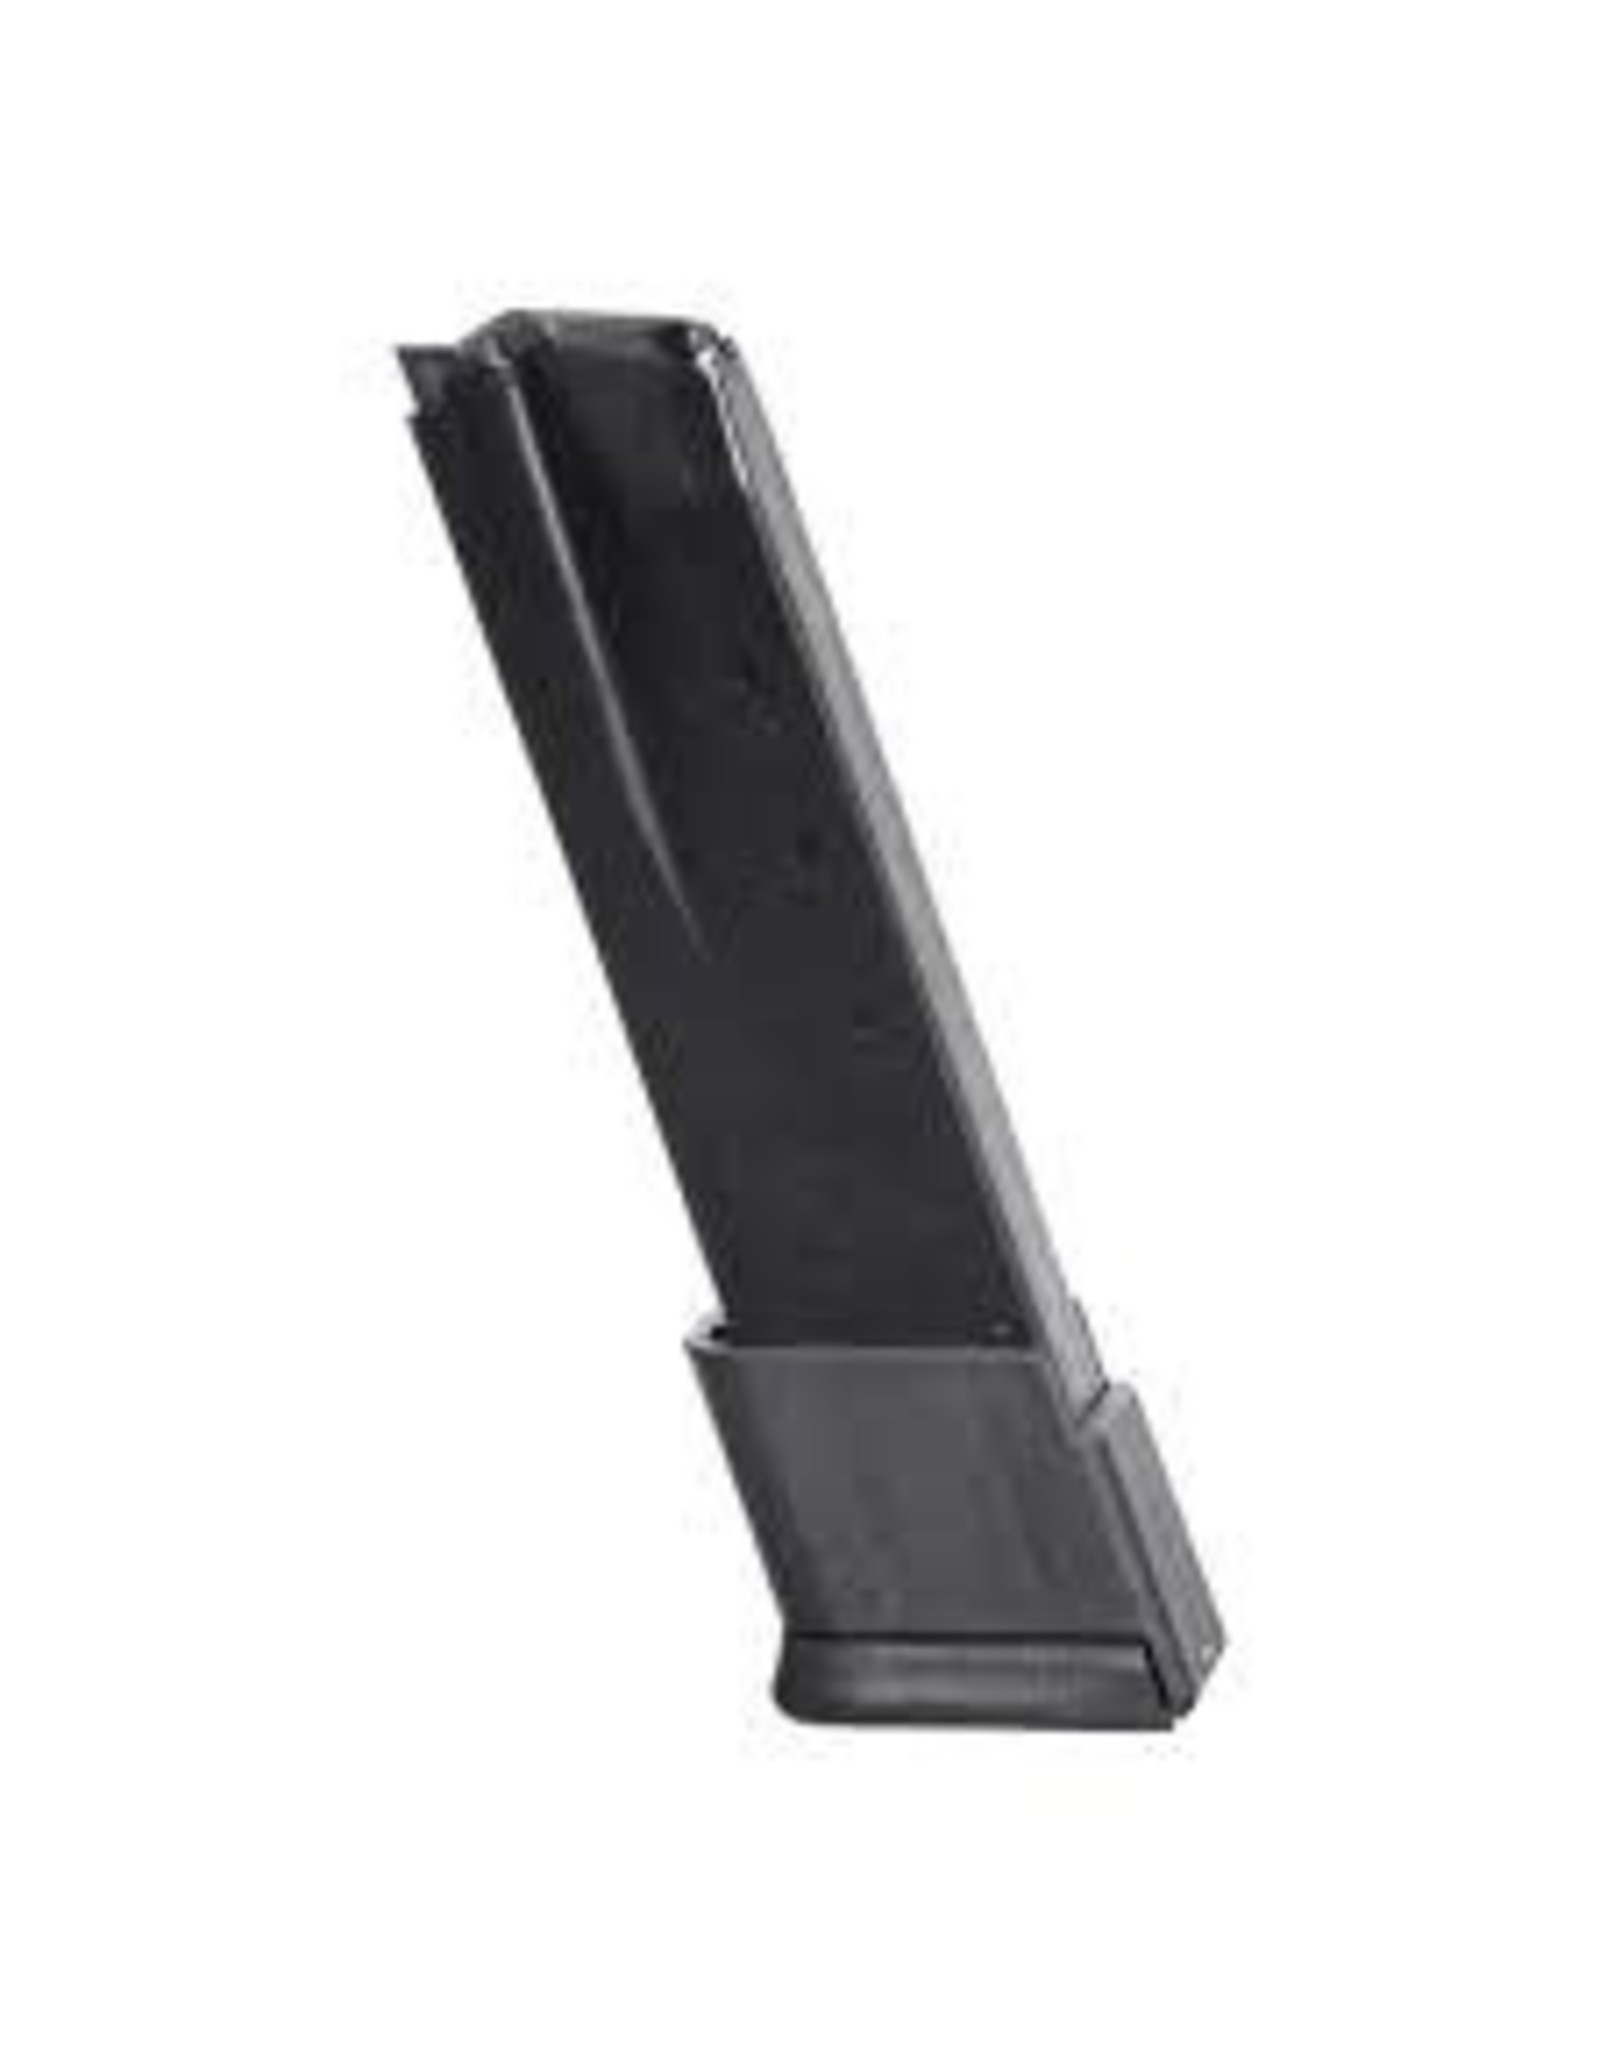 RUGER RUGER 45 AUTO MAG